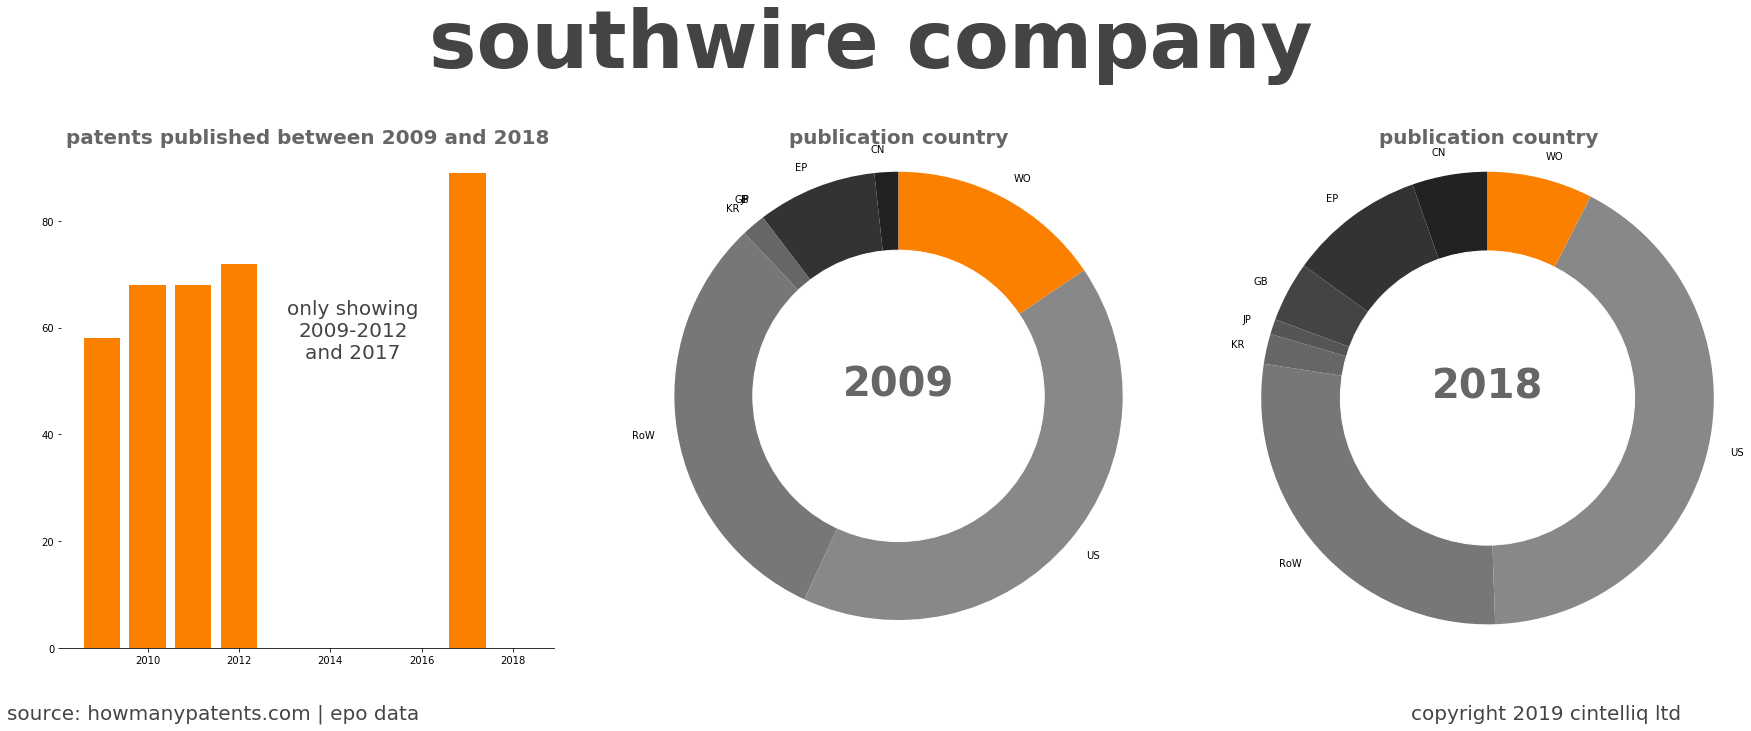 summary of patents for Southwire Company